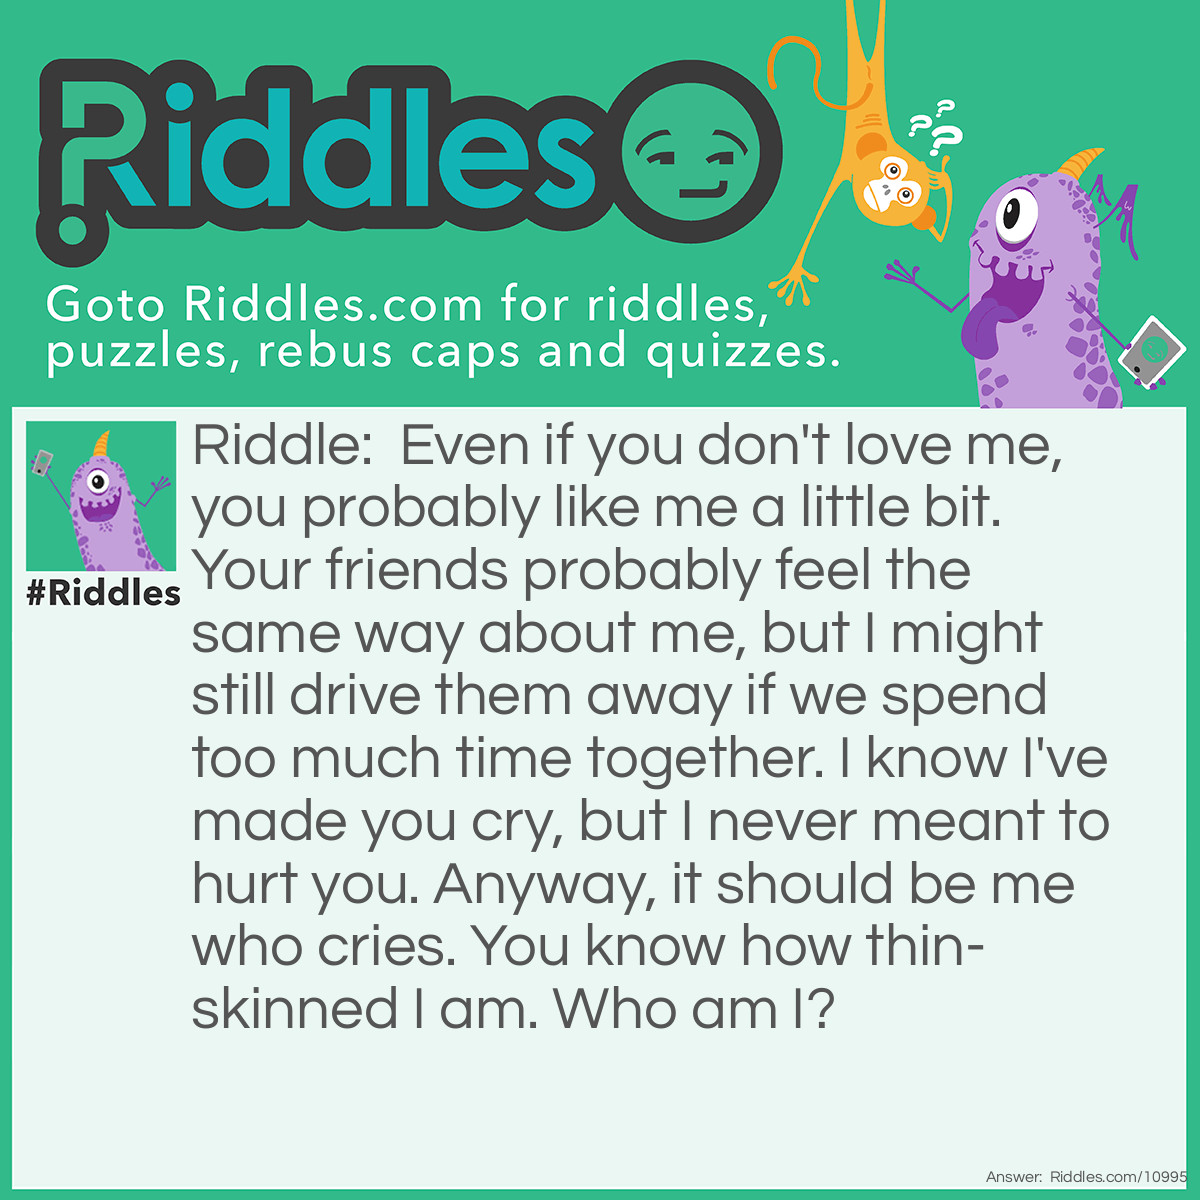 Riddle: Even if you don't love me, you probably like me a little bit. Your friends probably feel the same way about me, but I might still drive them away if we spend too much time together. I know I've made you cry, but I never meant to hurt you. Anyway, it should be me who cries. You know how thin-skinned I am. Who am I? Answer: An onion.